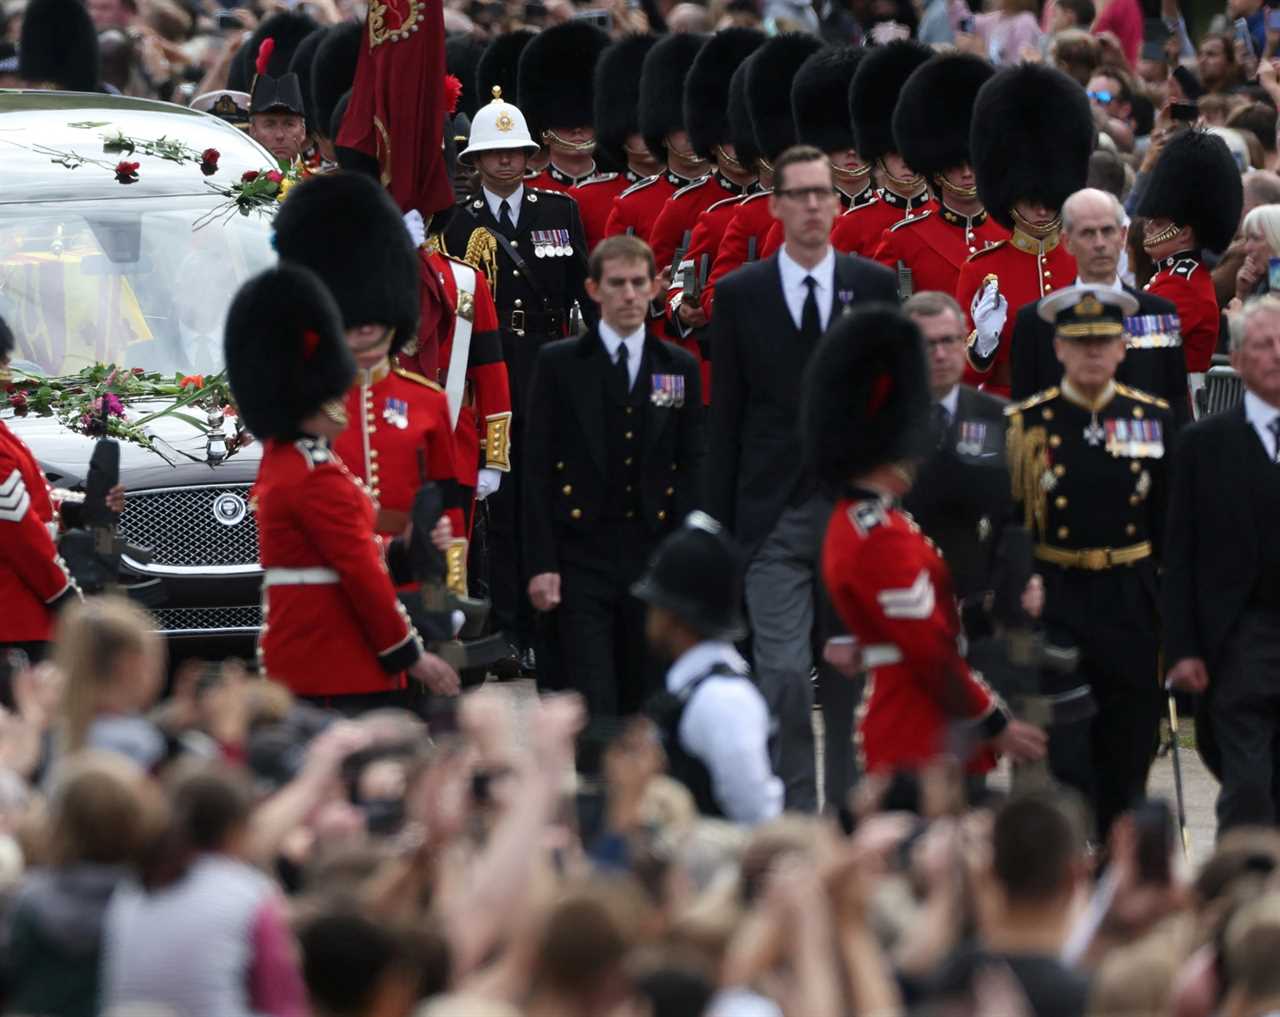 Viewers all have one question about a man walking ahead of the queen’s hearse on the way to Windsor